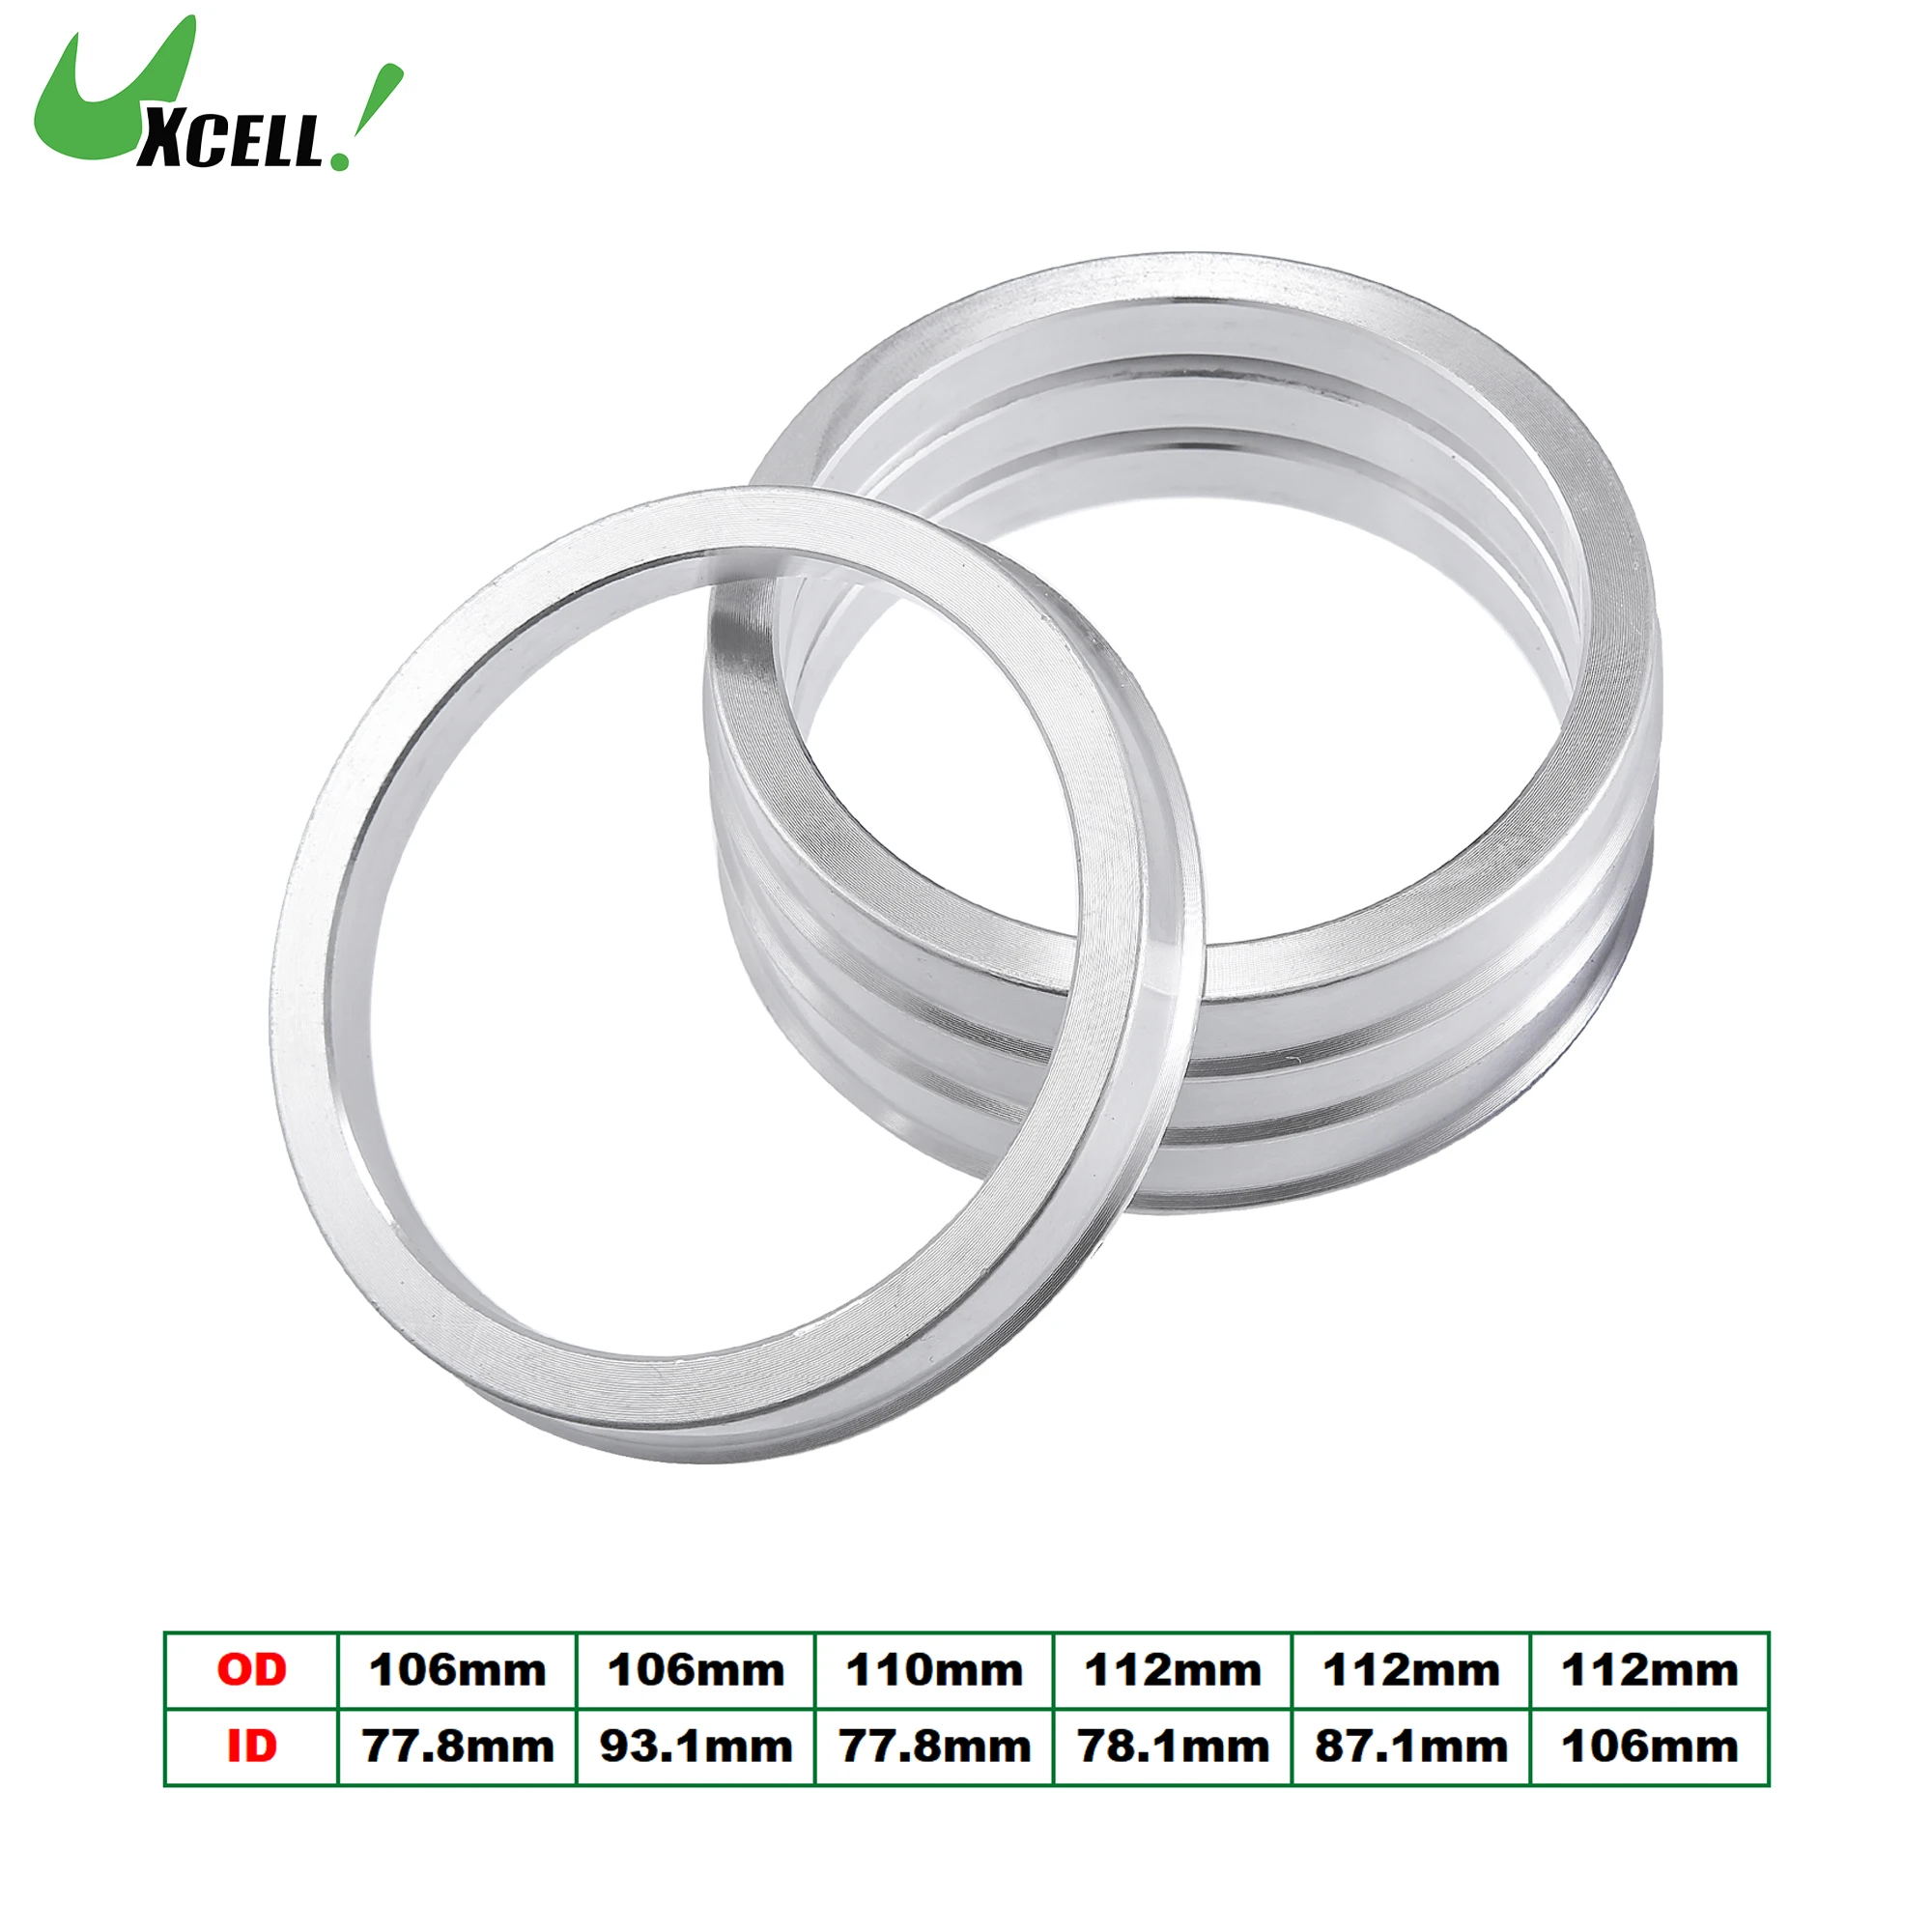 

UXCELL 4pcs OD 106mm 110mm 112mm to ID 77.8mm 78.1mm 87.1mm 93.1mm Aluminium Alloy Car Hub Centric Rings Bore Spacer